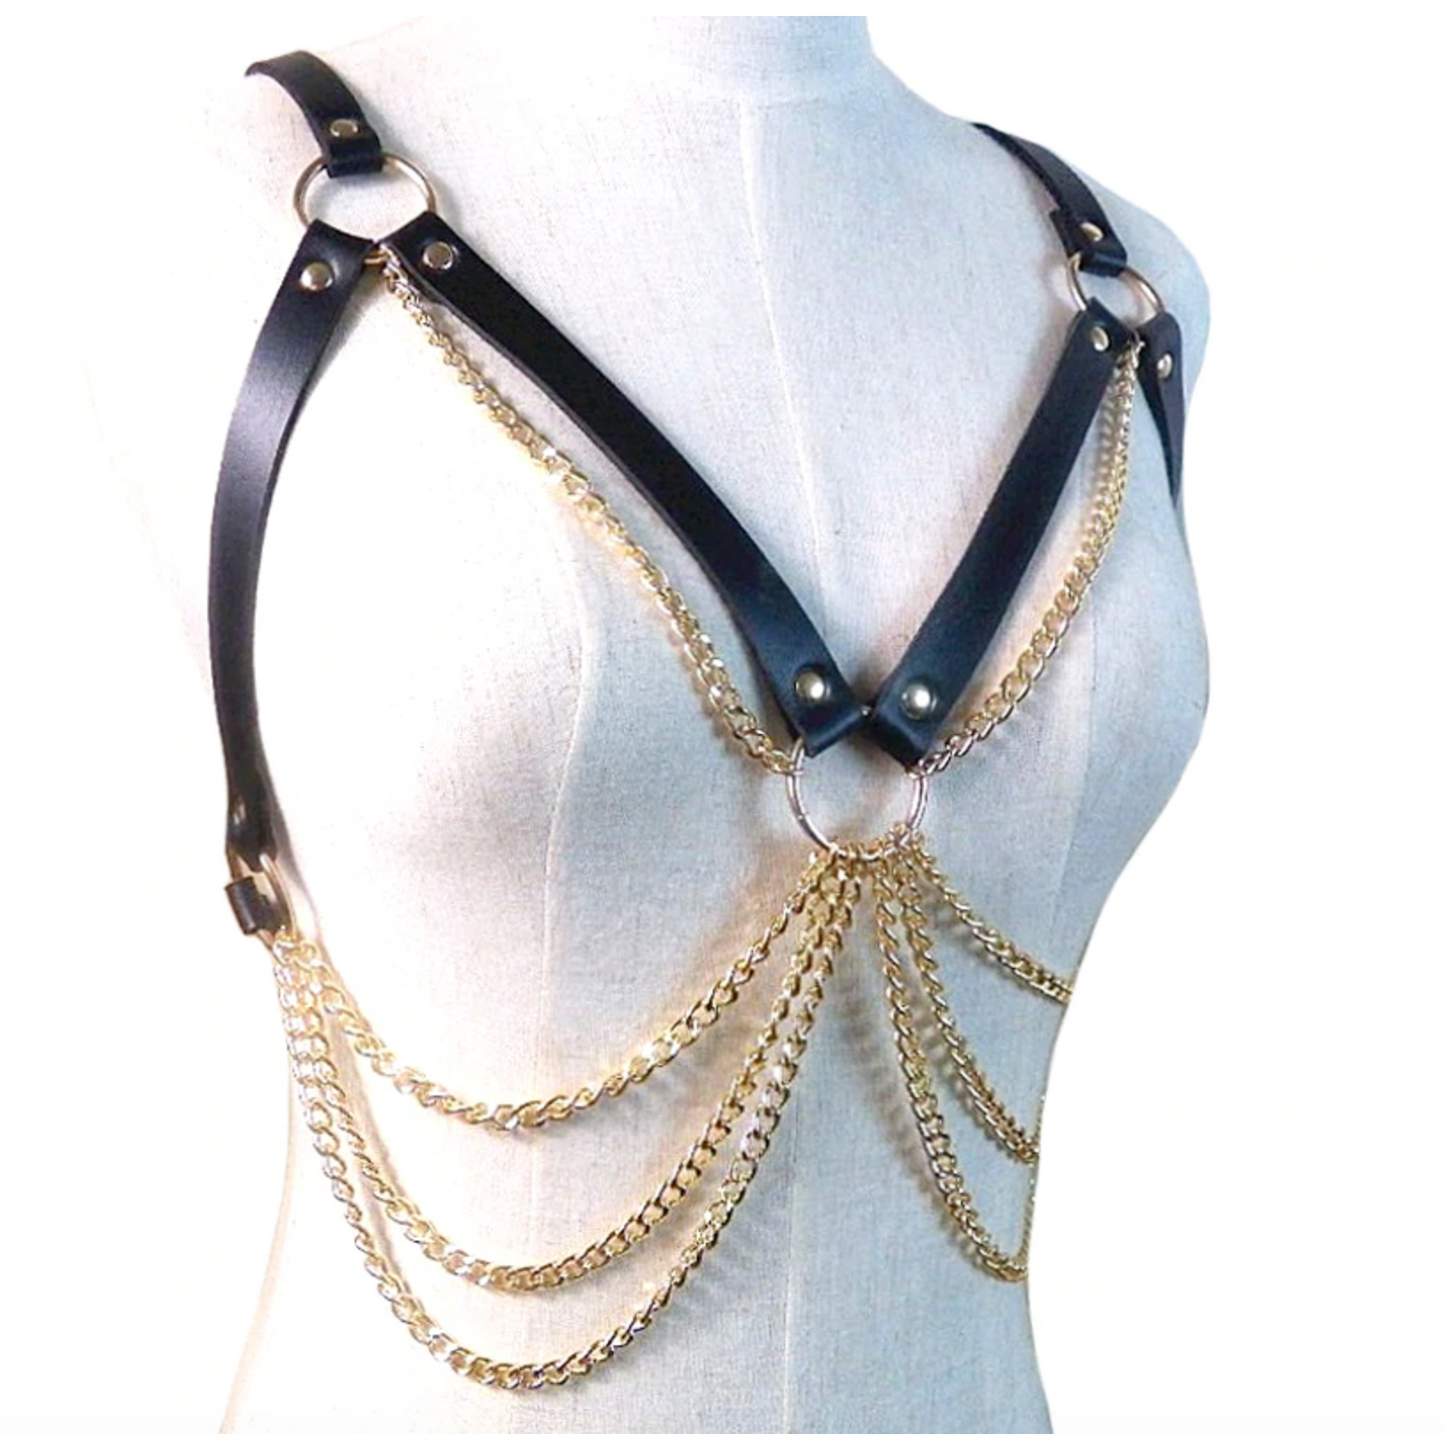 Chest Harness with Gold Chain